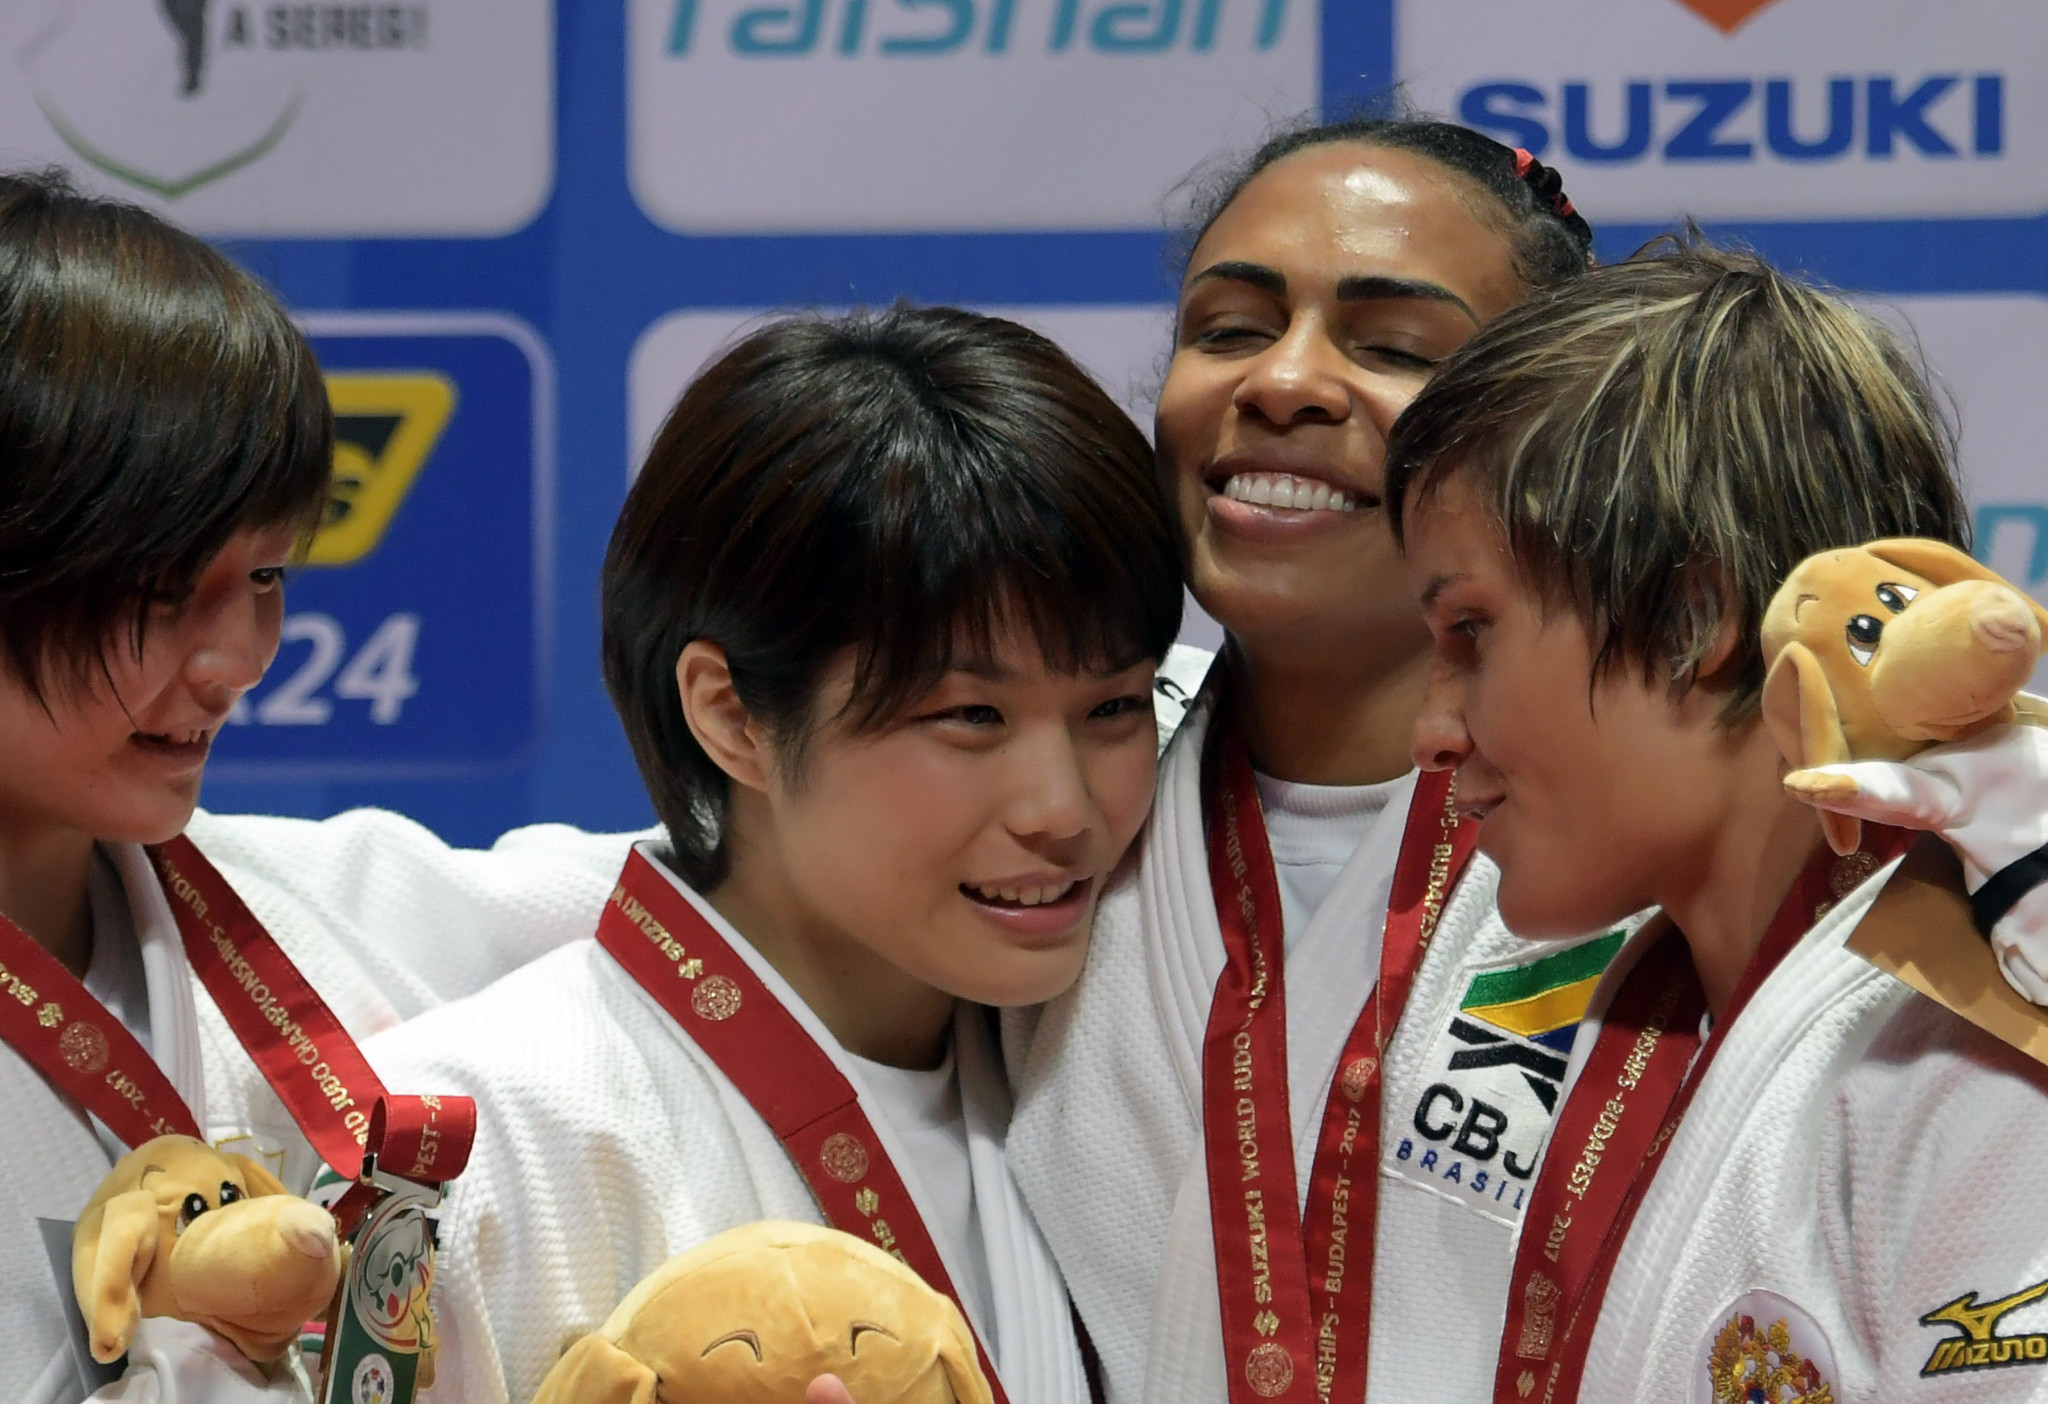 Kelmendi fails to win a medal as Japan continue domination at IJF World Championships